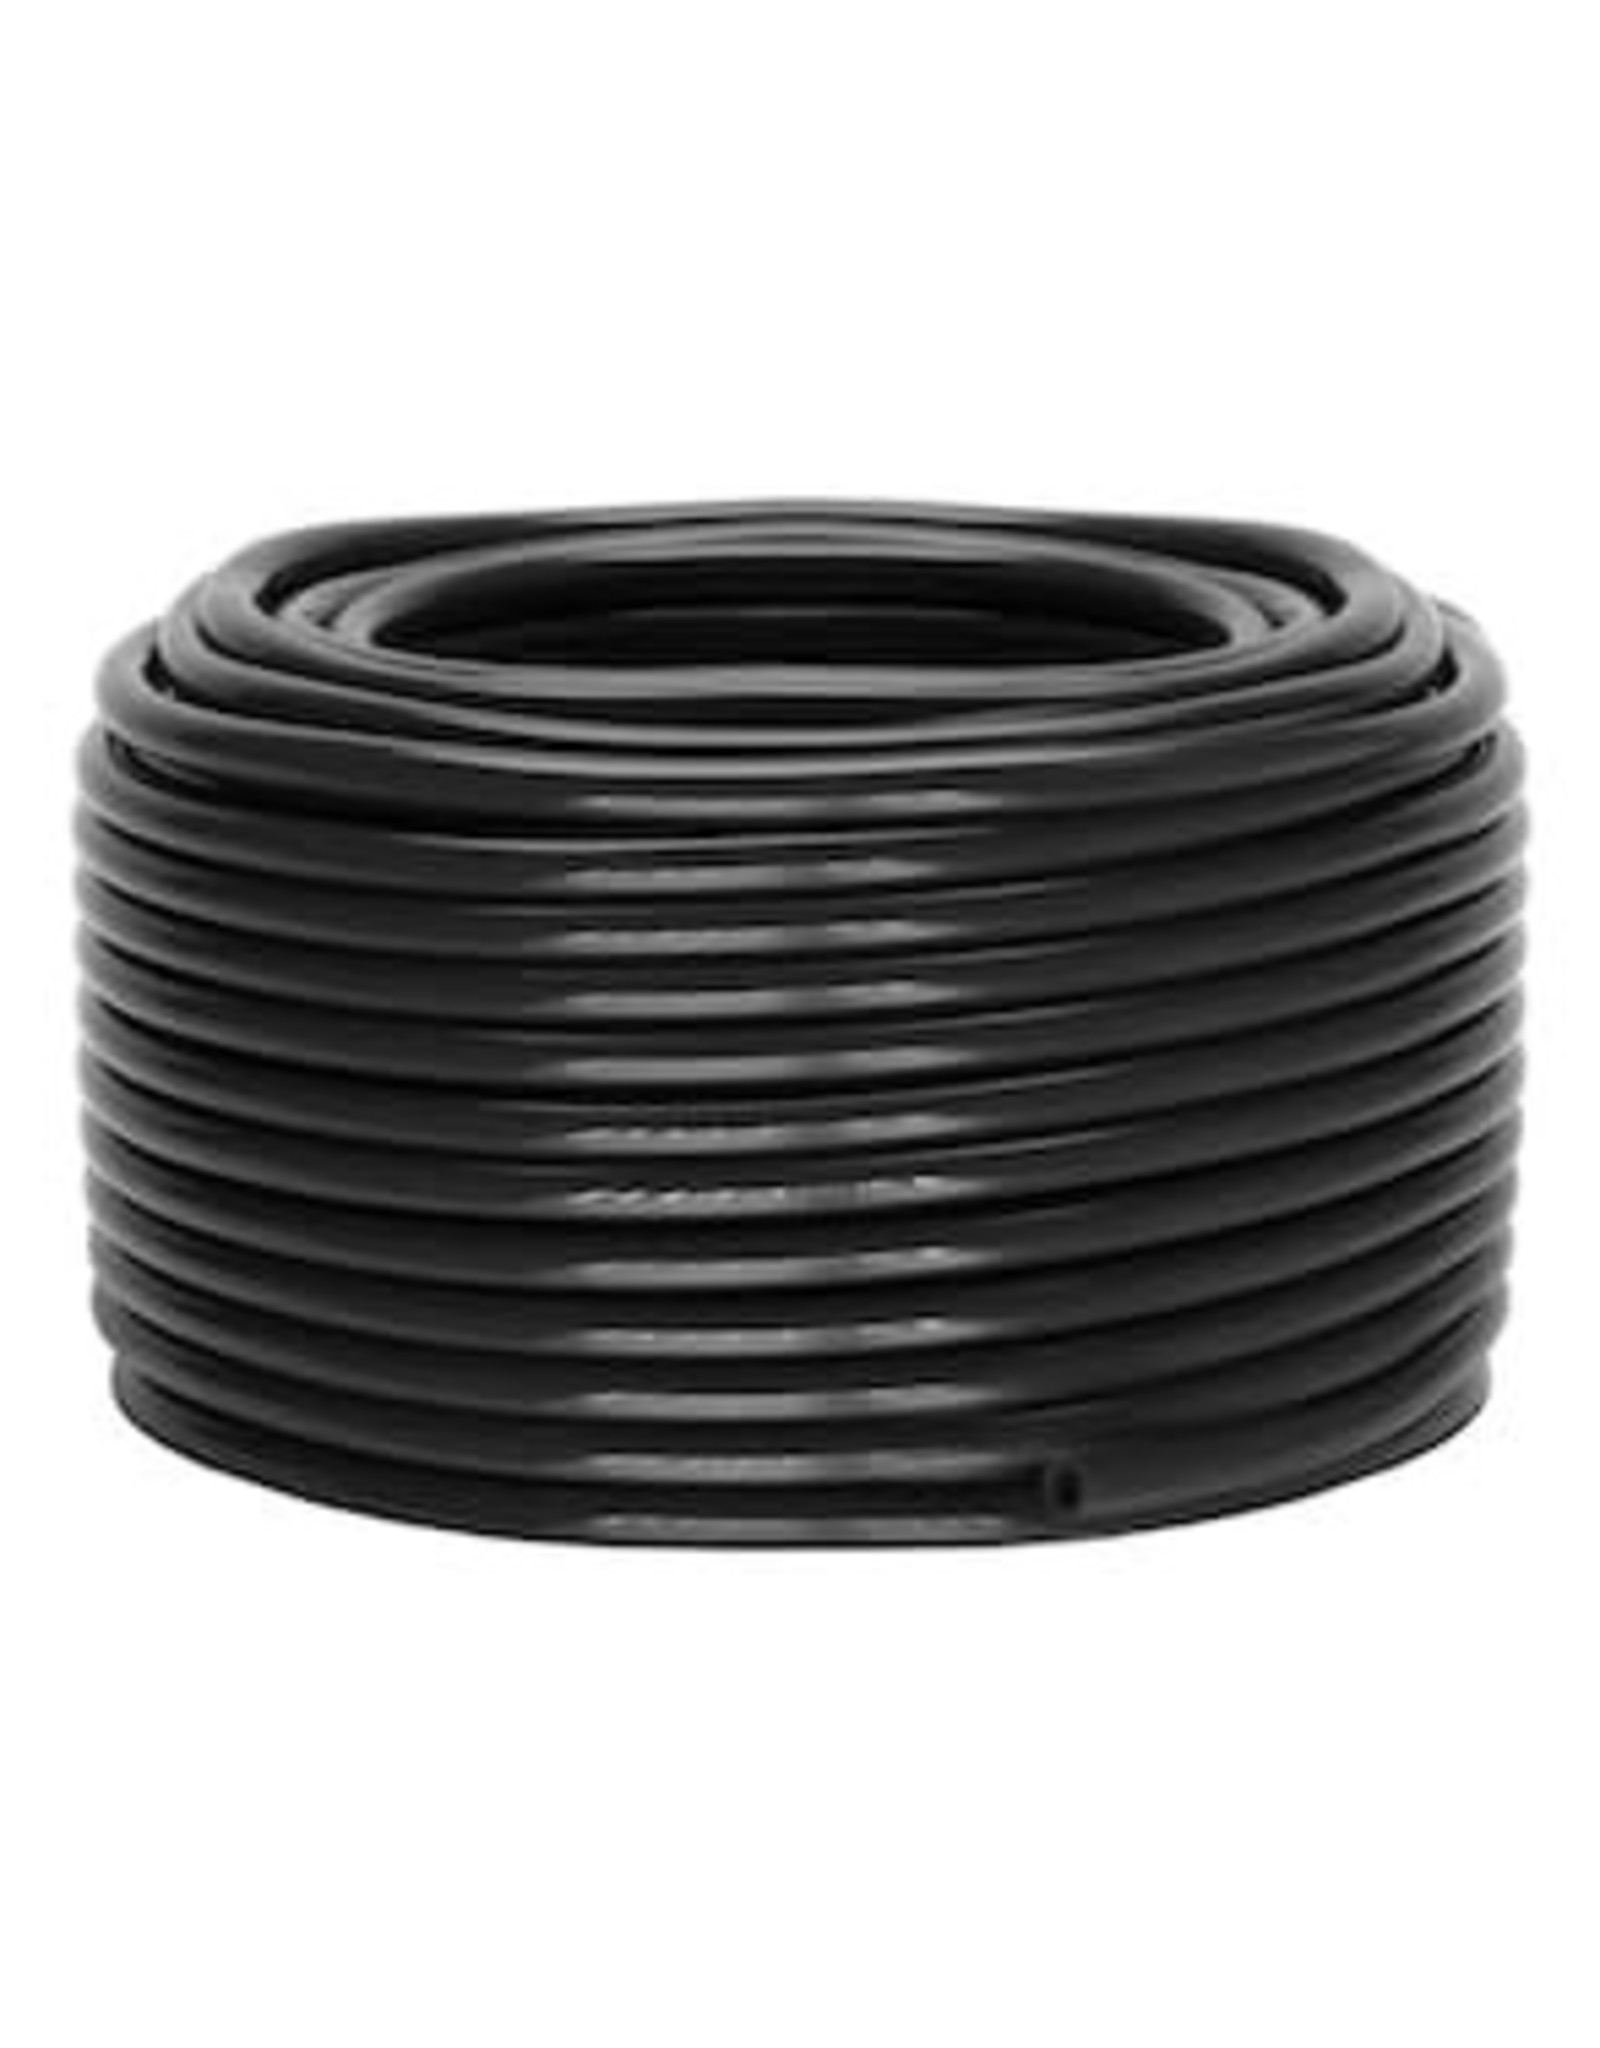 Grow1 Grow1 Black Vinyl Tubing I.D. 1''   (Sold By The Foot)